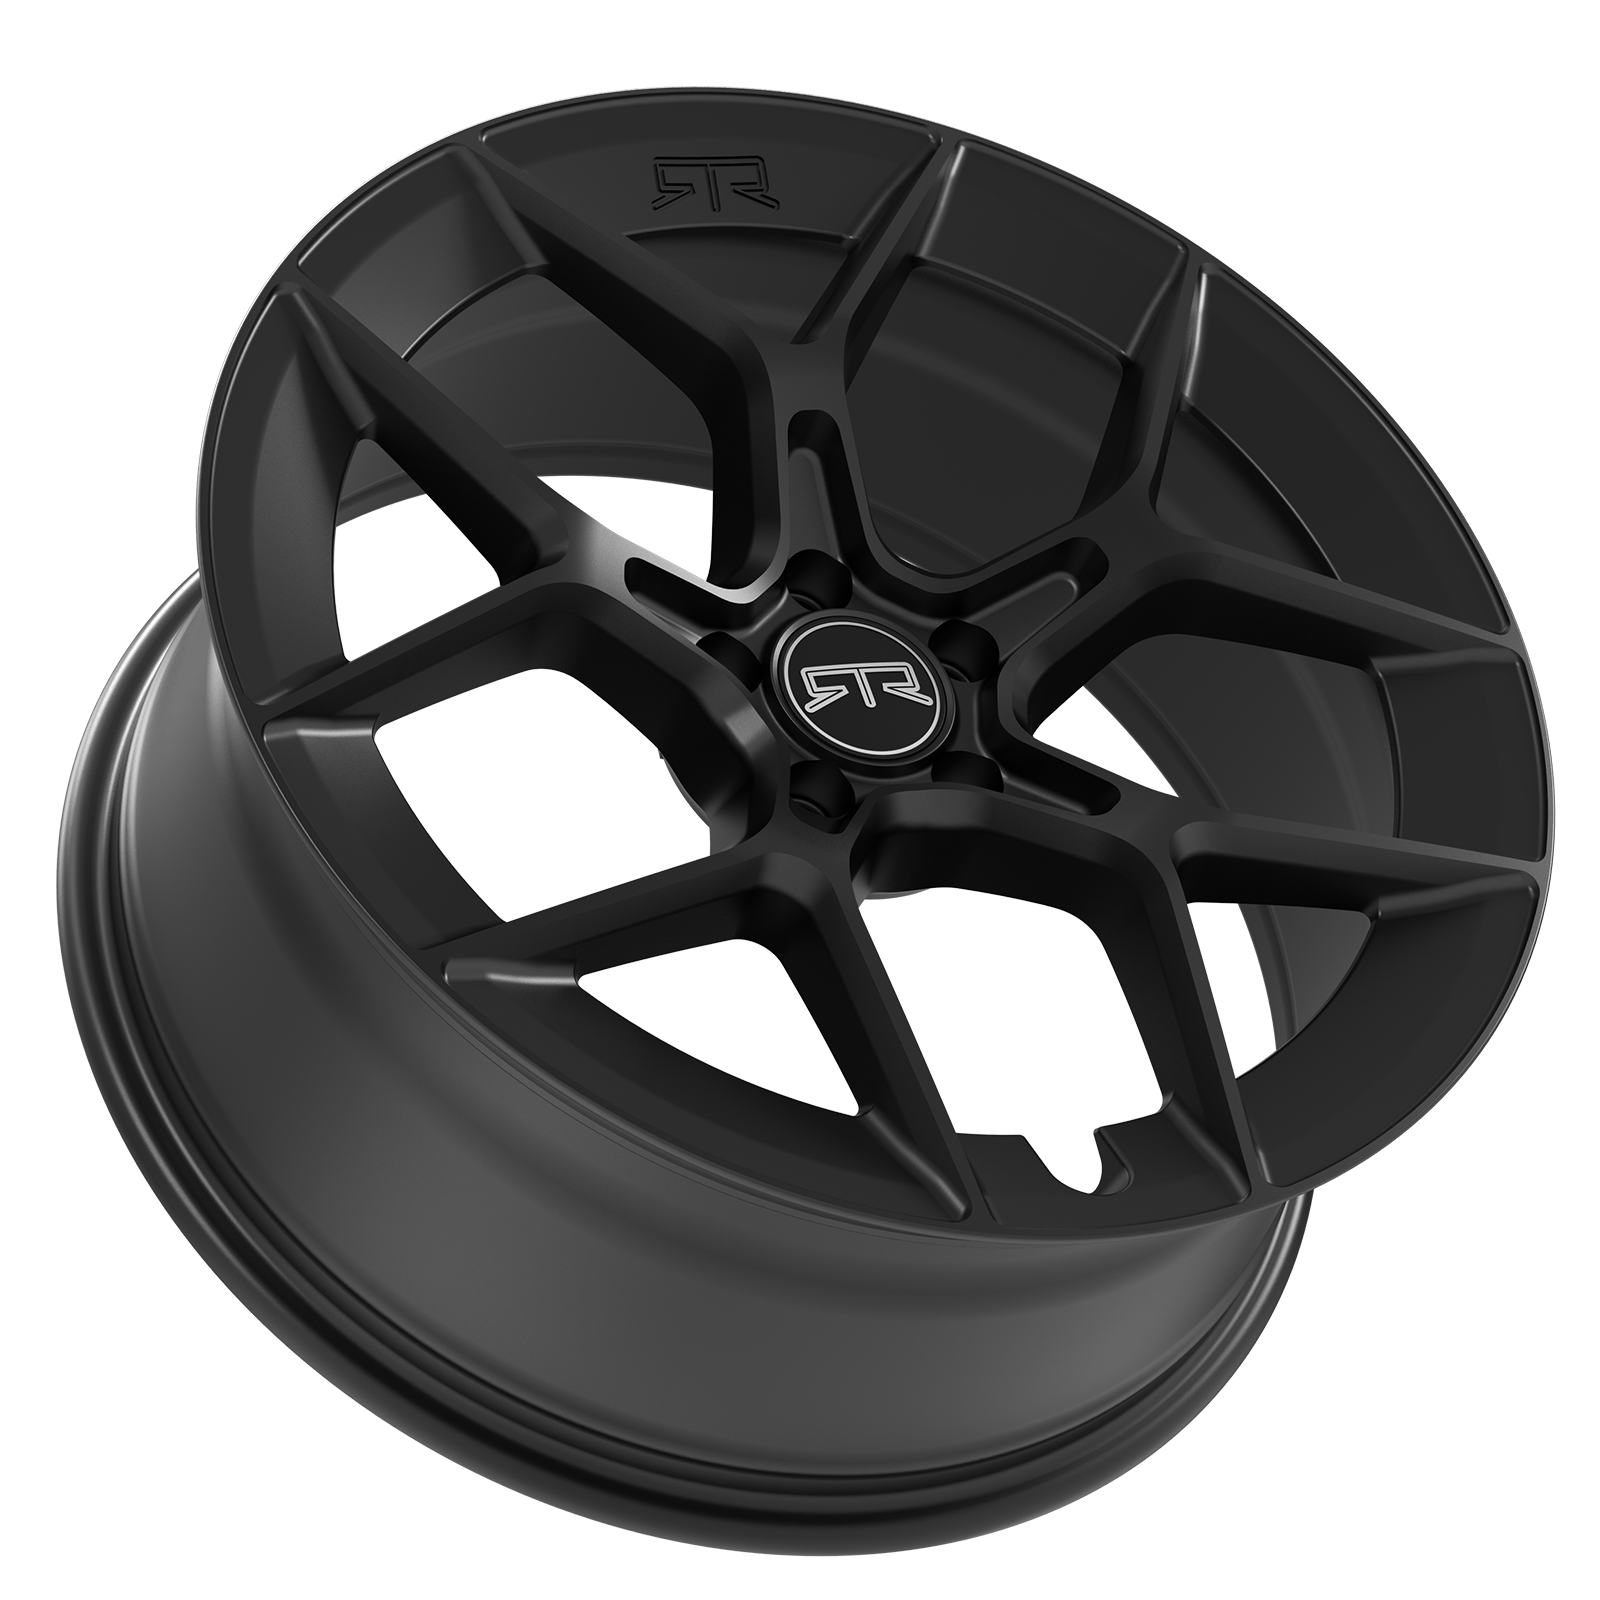 "RTR Aero 5 Mustang Mach-E Wheel | Satin Black/Satin Charcoal | 20x8.5 +31 Offset | Fits 2021+ Mustang Mach-E | Flow Forming Technology | Hub-Centric Design | Enhanced Aerodynamics | Precision Craftsmanship | Upgrade Your Mach-E's Style and Performance"